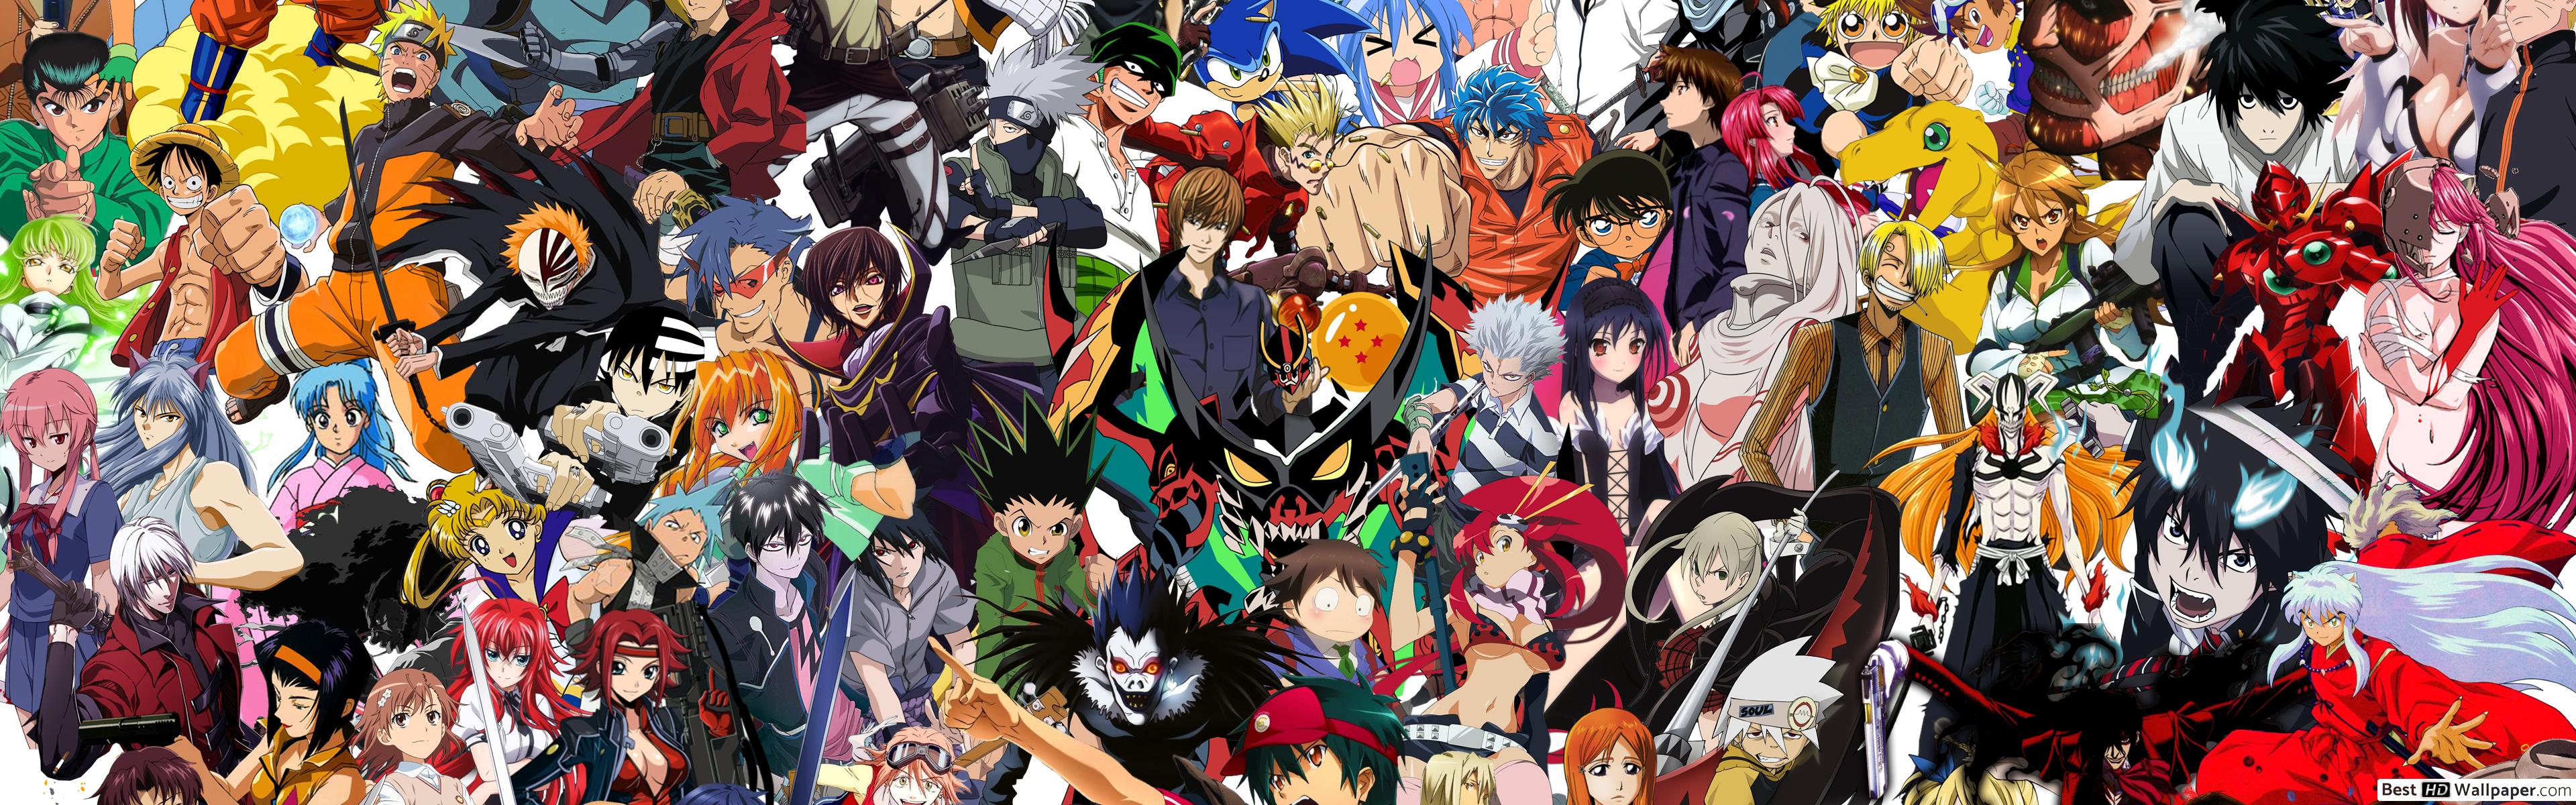 Anime Crossover Poster HD Wallpaper